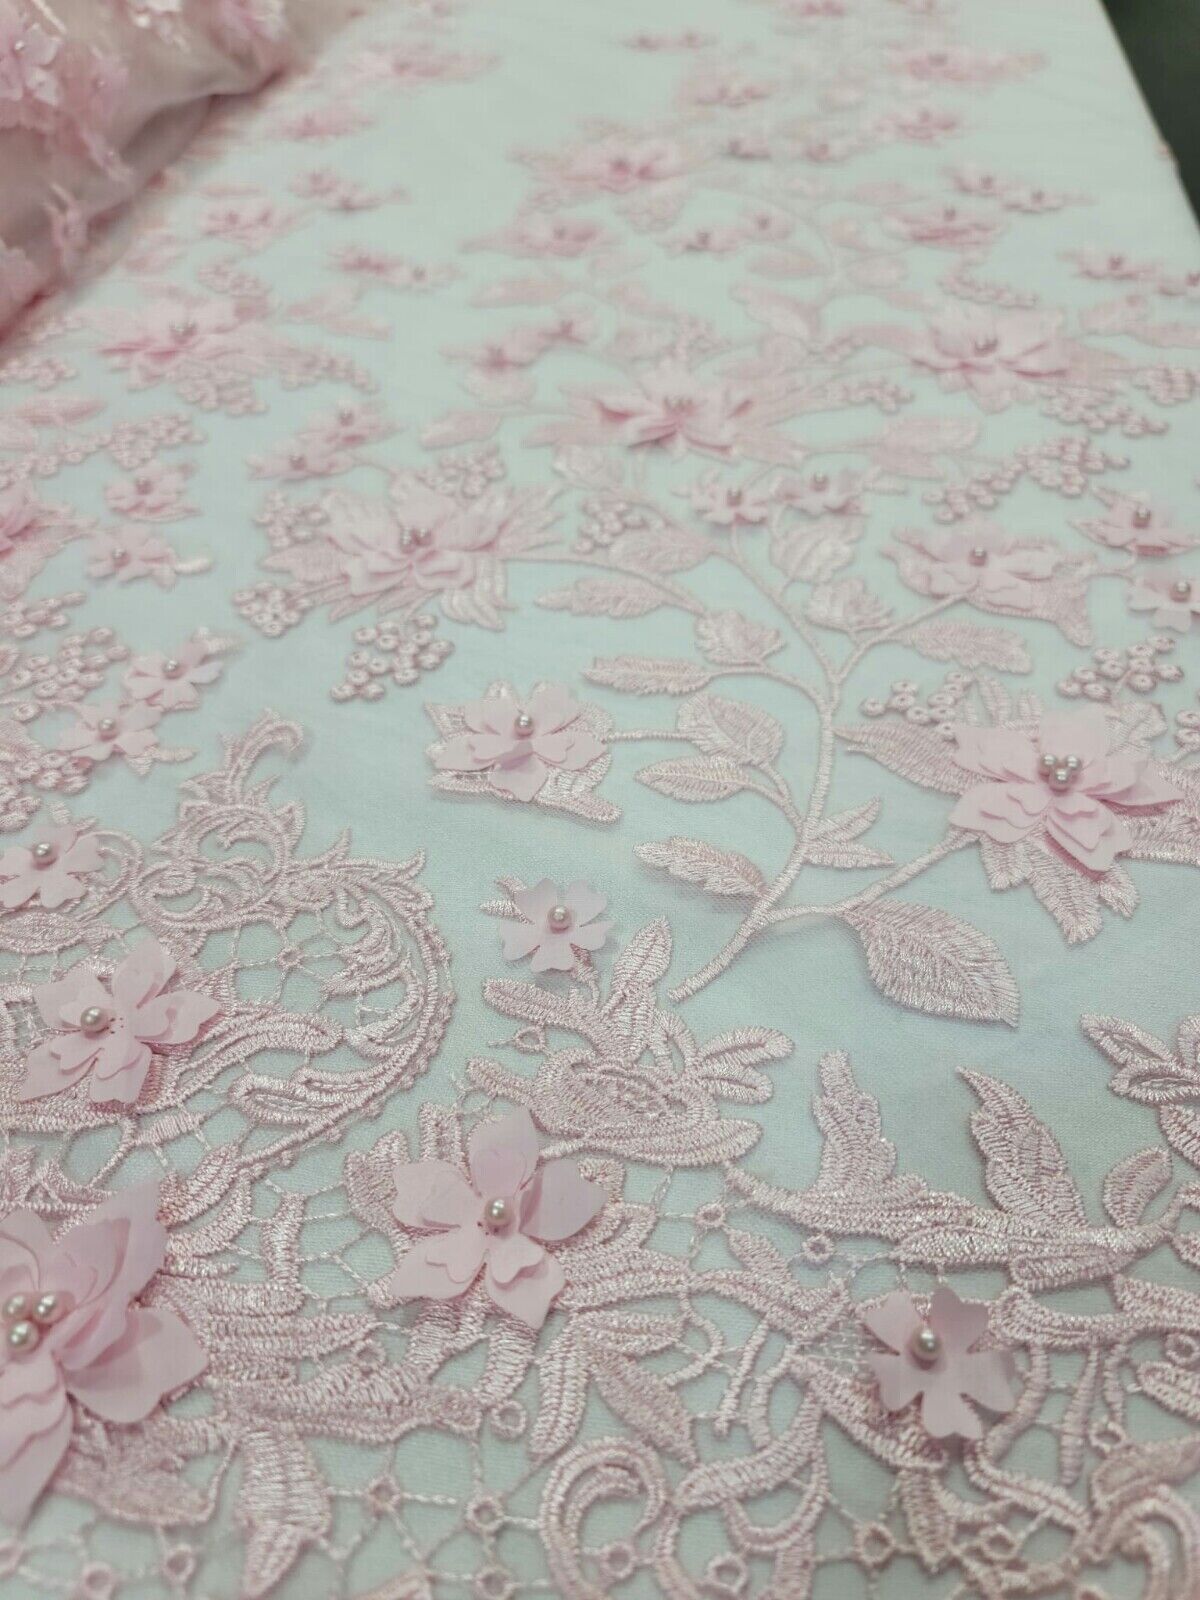 Pink Lace 3D Floral Flowers Prom Fabric - Sold by the Yard for Quinceañera Bridal